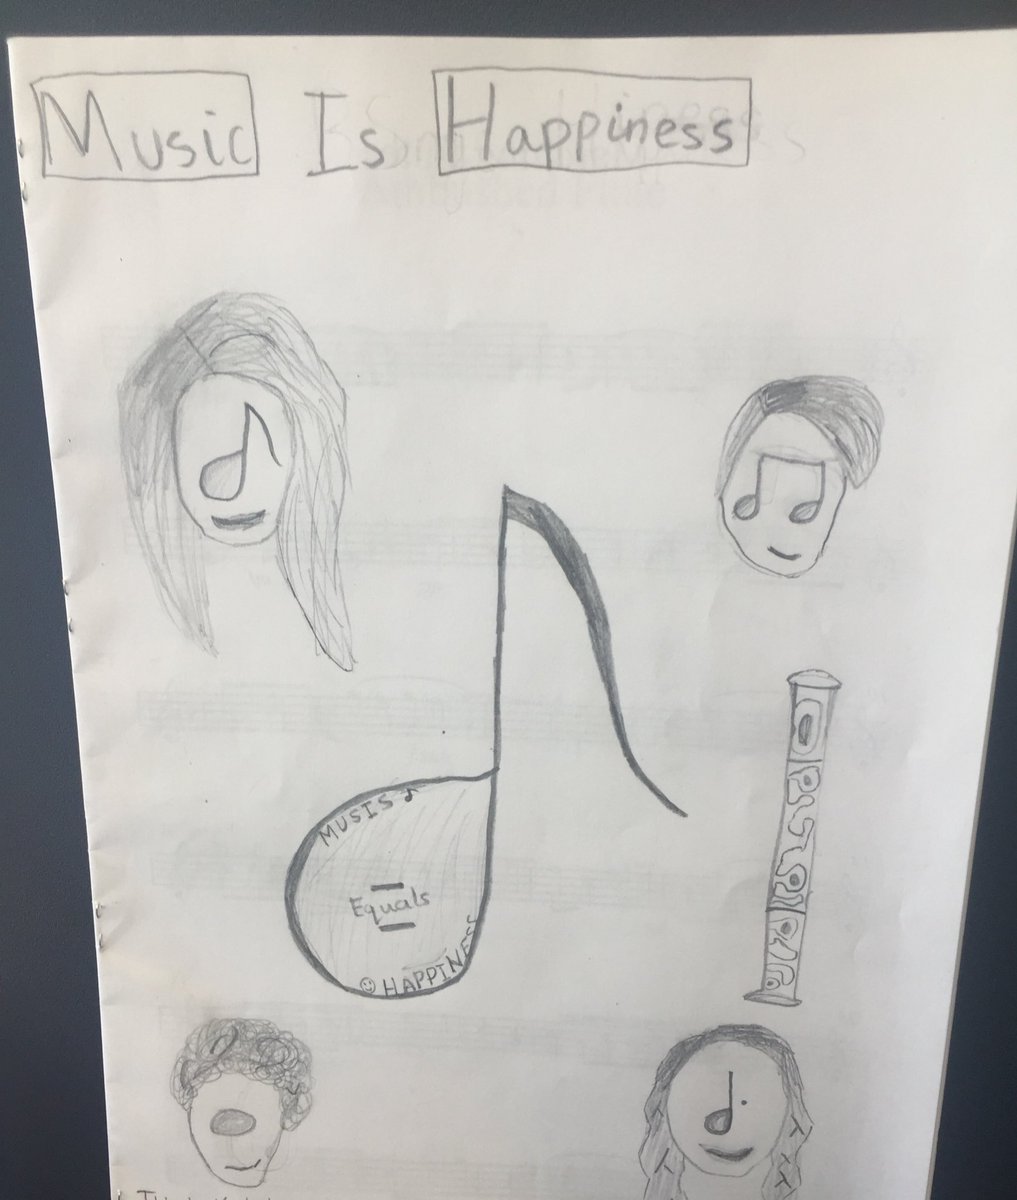 Lovely to be getting back into the swing of things with @InHarmonyNE A flute pupil decorated her book of pieces like this-maybe this is a what we should have on the cover of every music book?! #musicishappiness